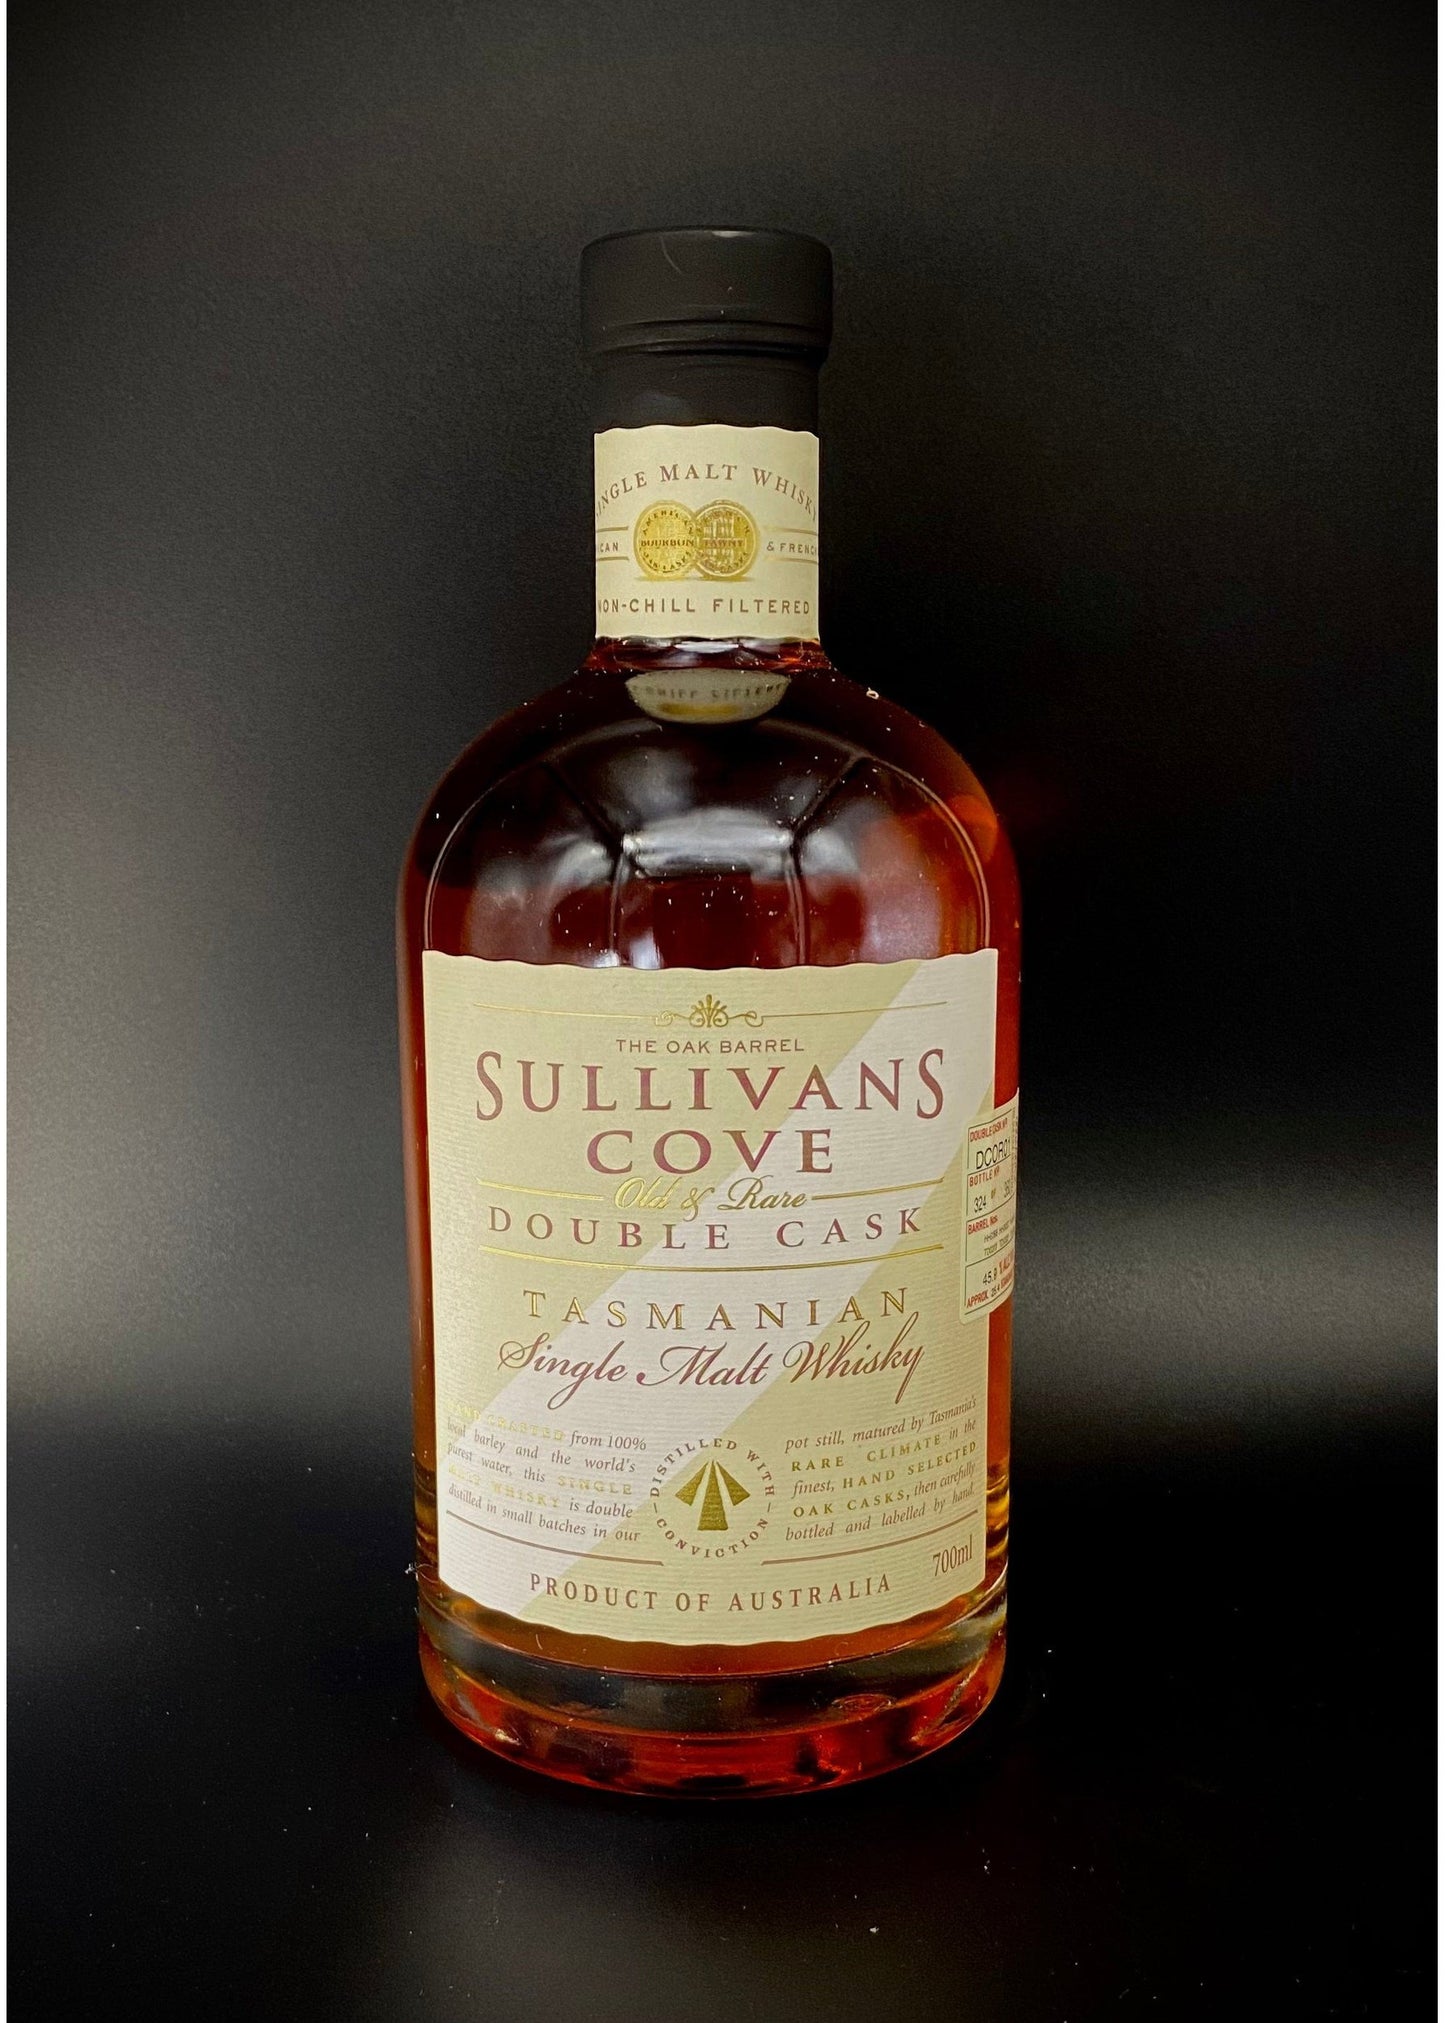 Horny Pony  Sullivans Cove Cask#DCOR01 Exclusive To The Oak Barrel - 45.9%ABV - 30ml